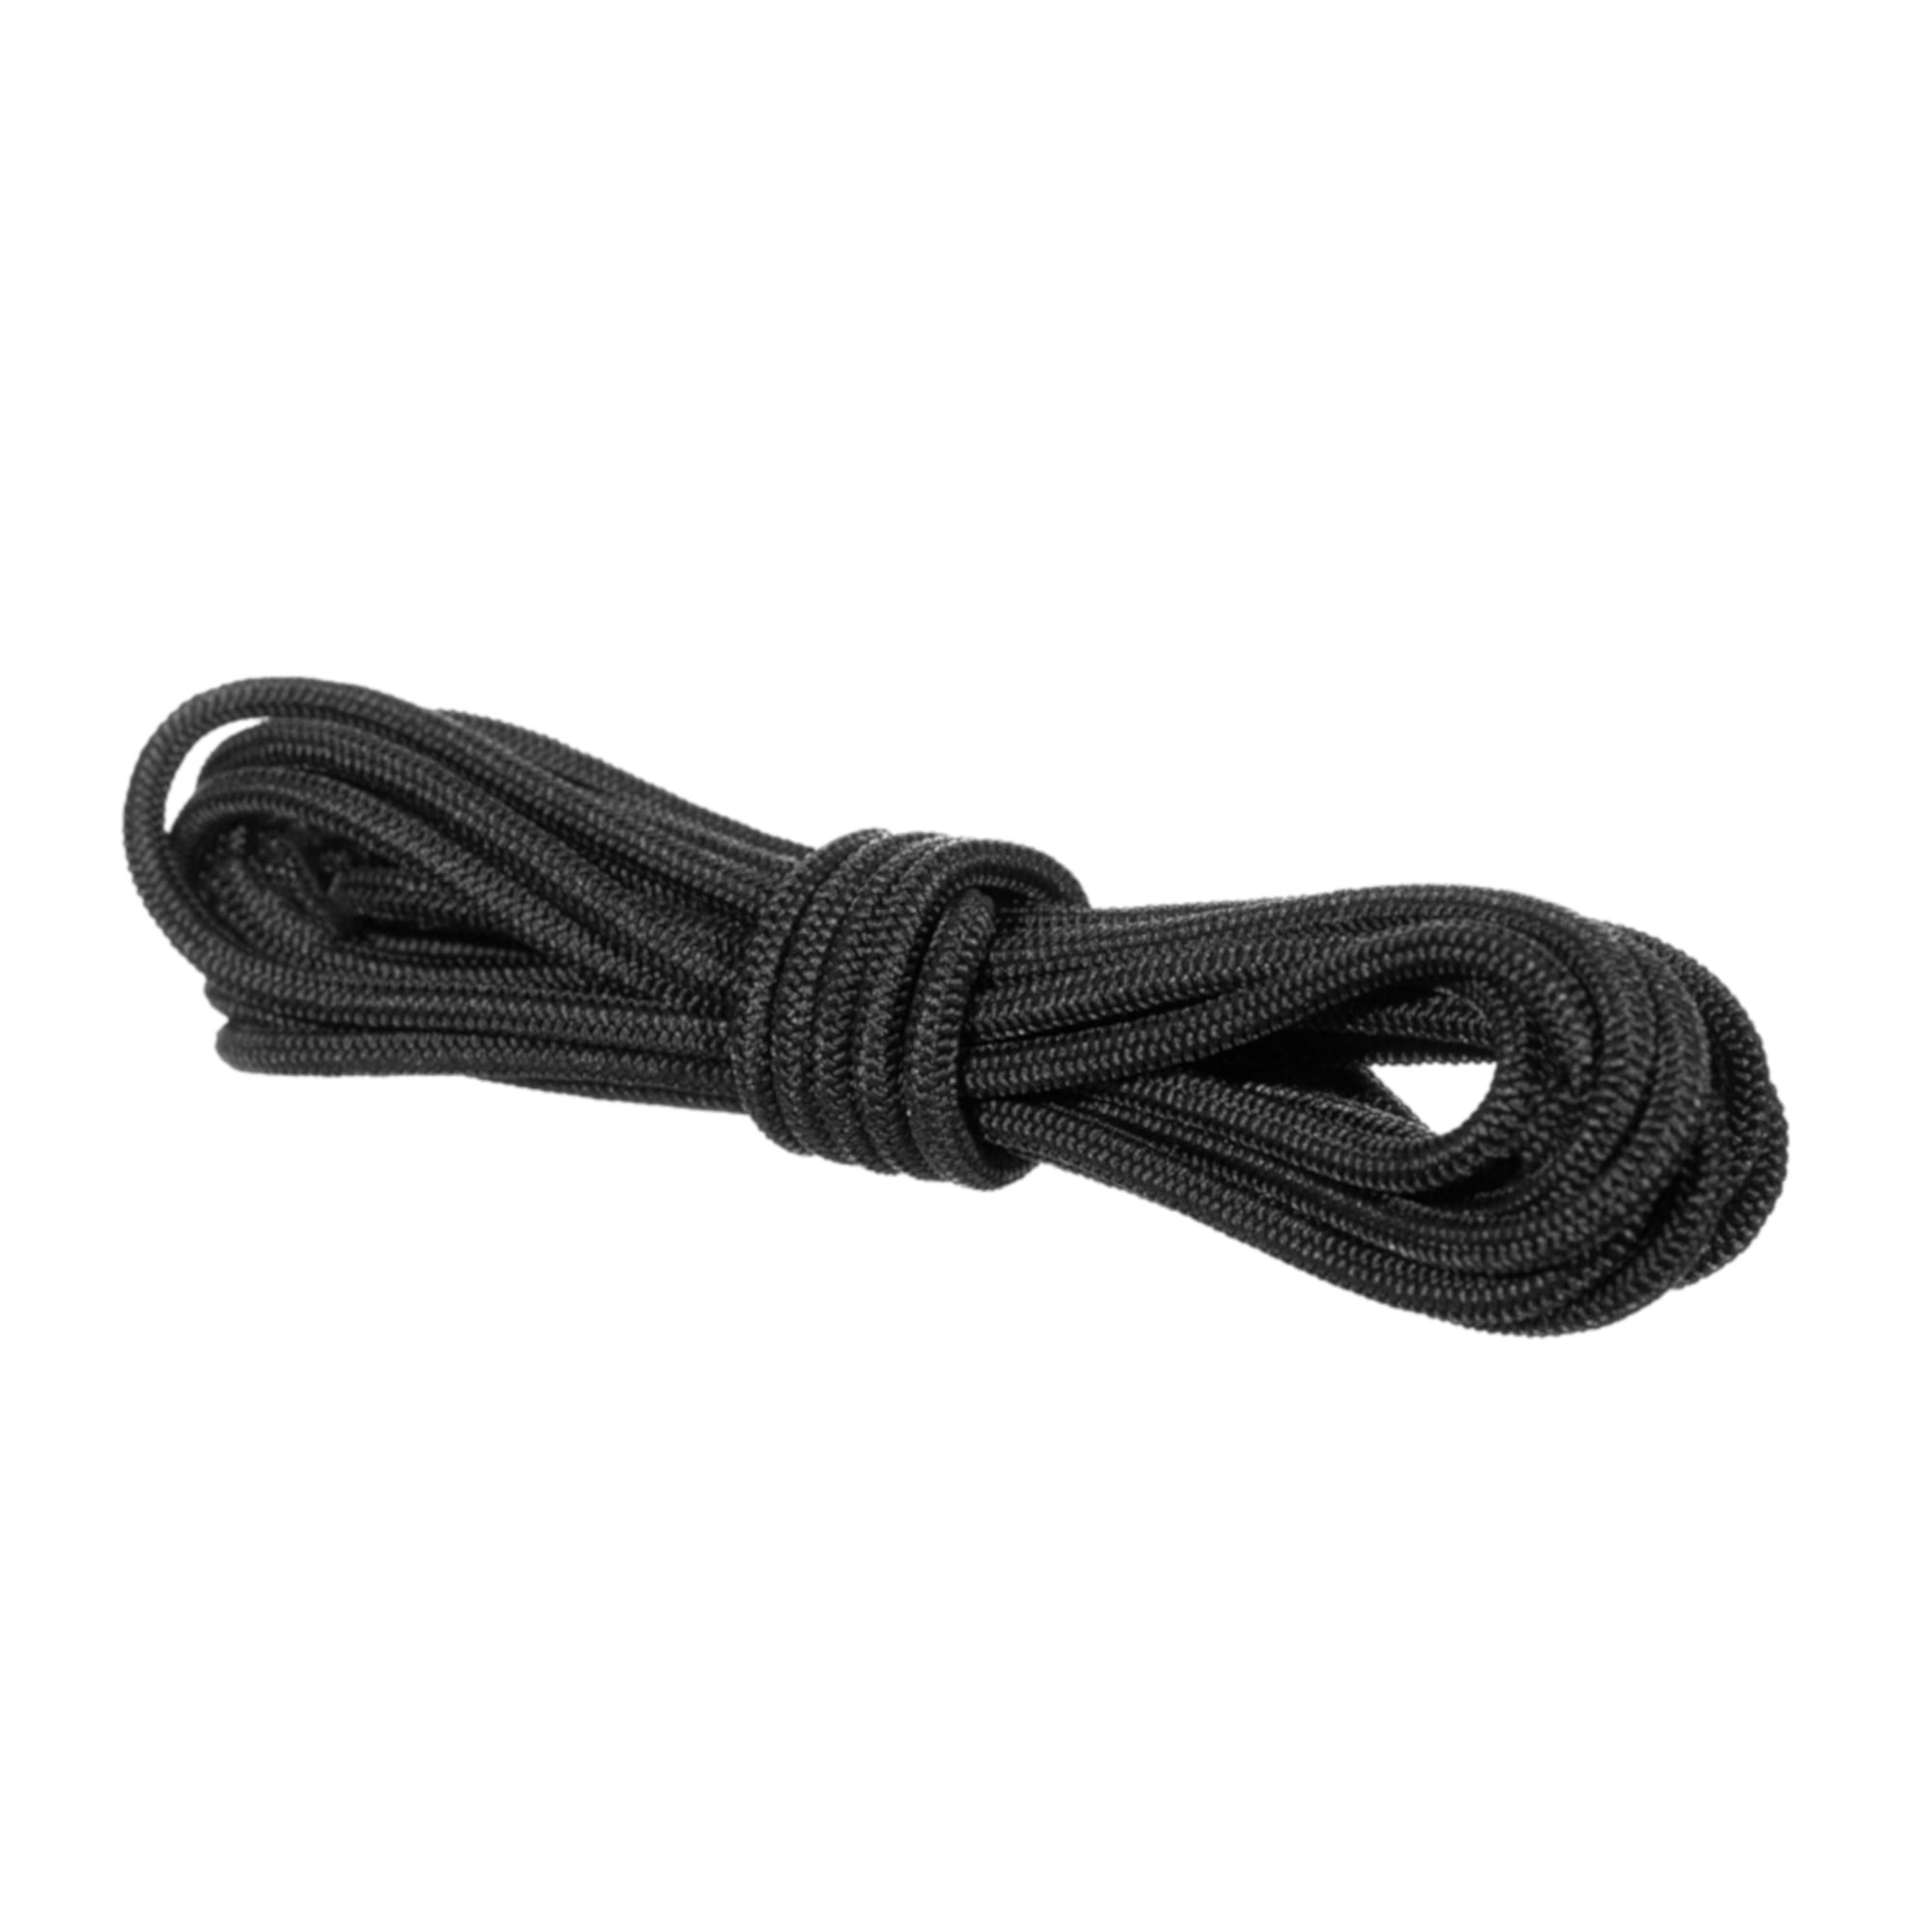 Mandala Crafts 1/8 5/32 3/16 ¼ Colored Elastic Nylon Round Bungee Shock Cord DIY Tactical Rope Replacement Roll for Zero Gravity Chair Repair Kayaks 45 FT or 15 Meters Long Mandala Crafts® 3mm 4mm 5mm Elastic Cord , Black 6mm 